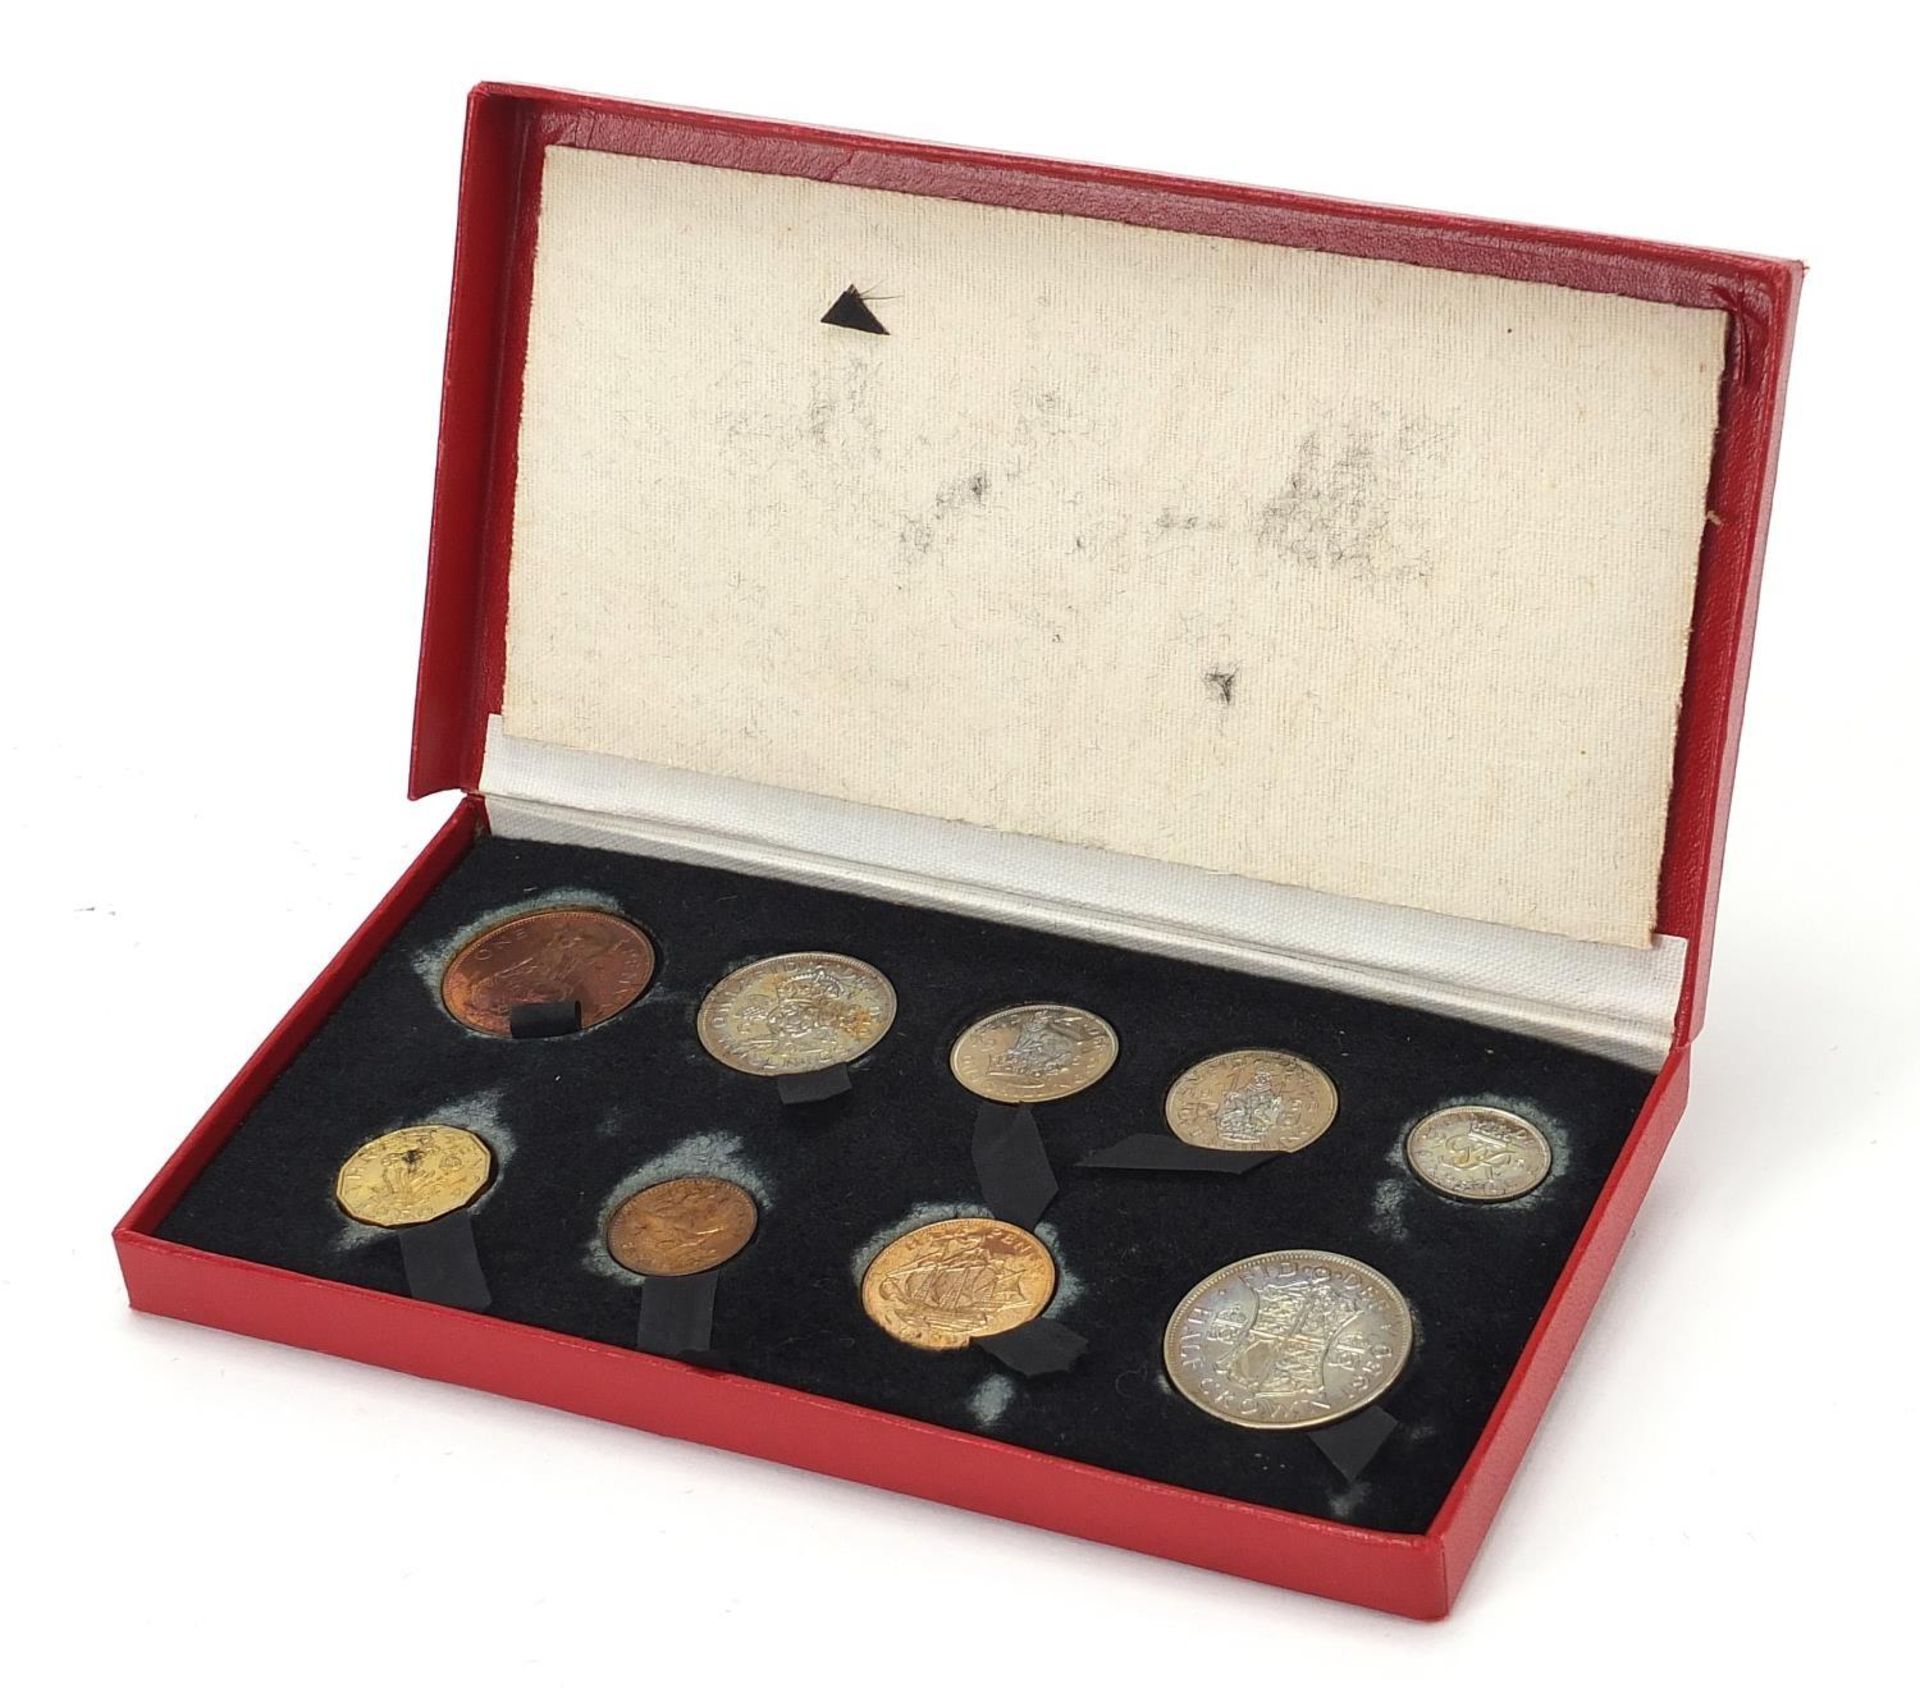 George VI 1950 nine coin specimen coin set by The Royal Mint with fitted case